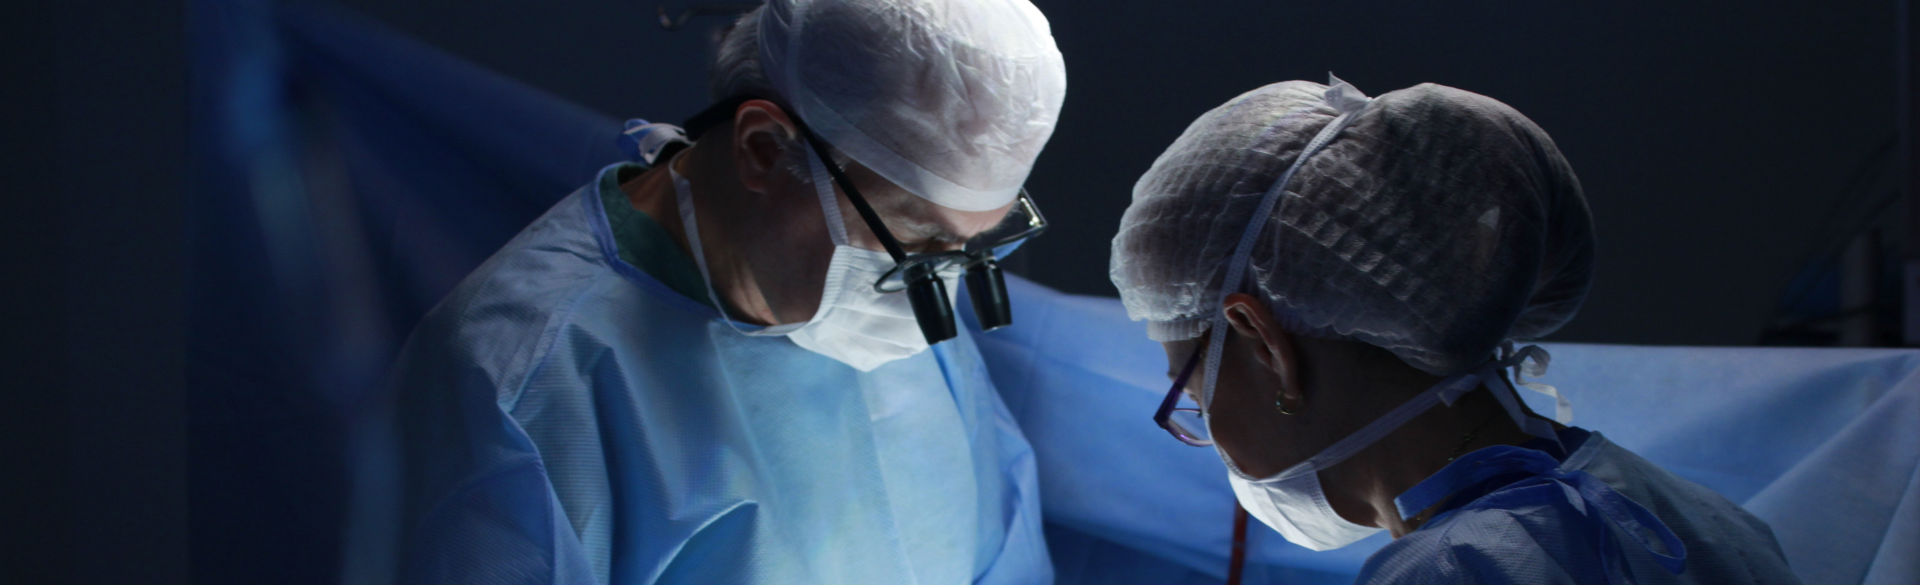 Two surgeons operating | University of Colorado Department of Surgery